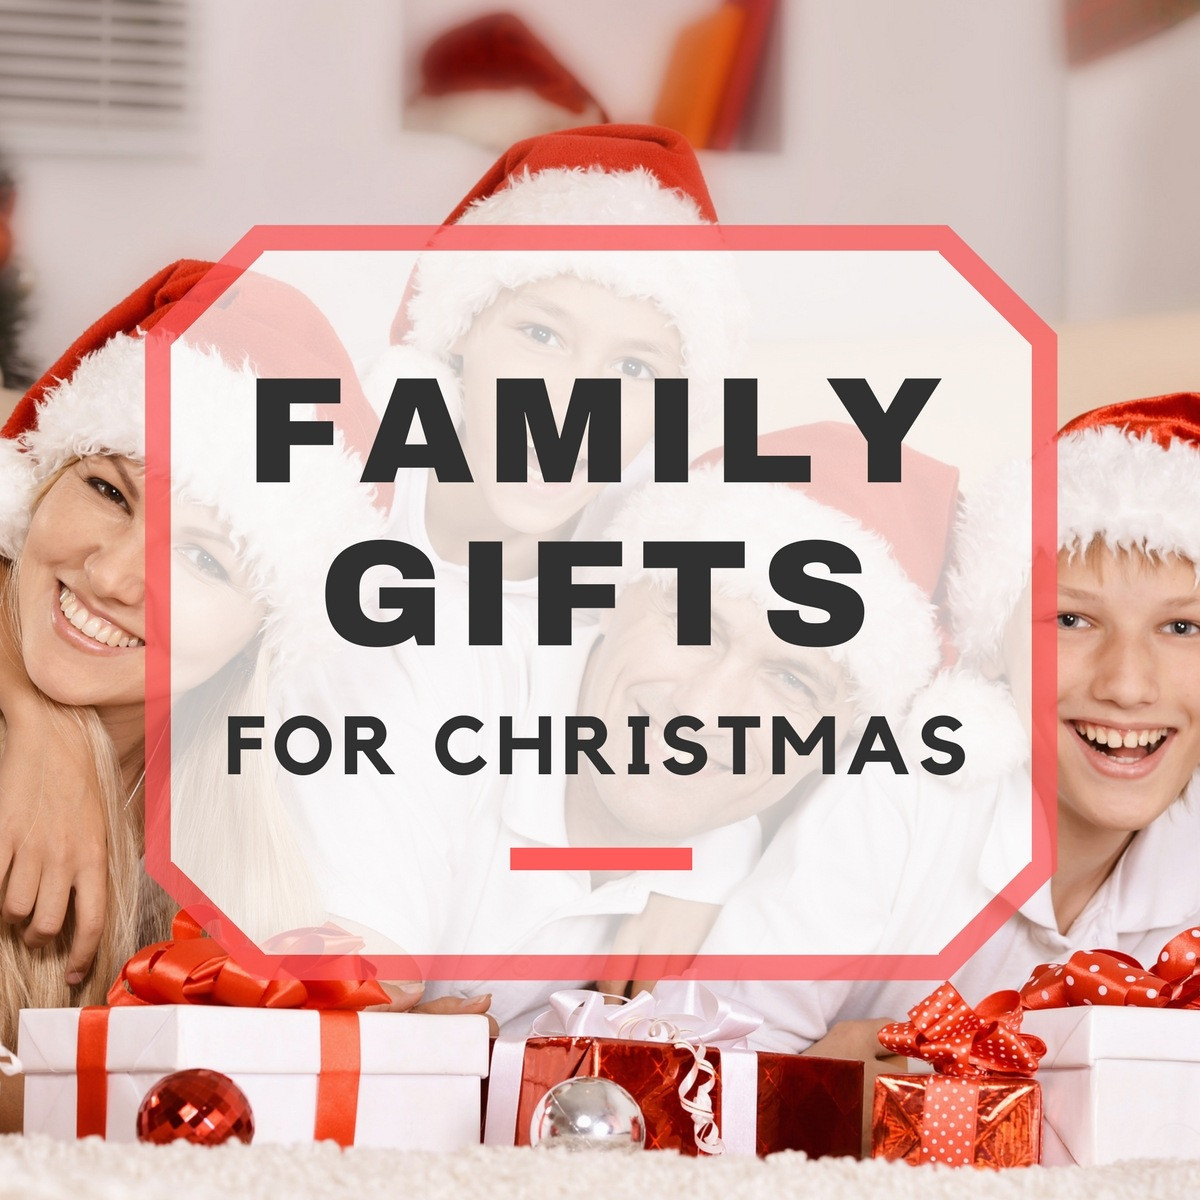 Fun Family Gifts For Christmas
 Family Gifts for Christmas Fun for the Whole Family